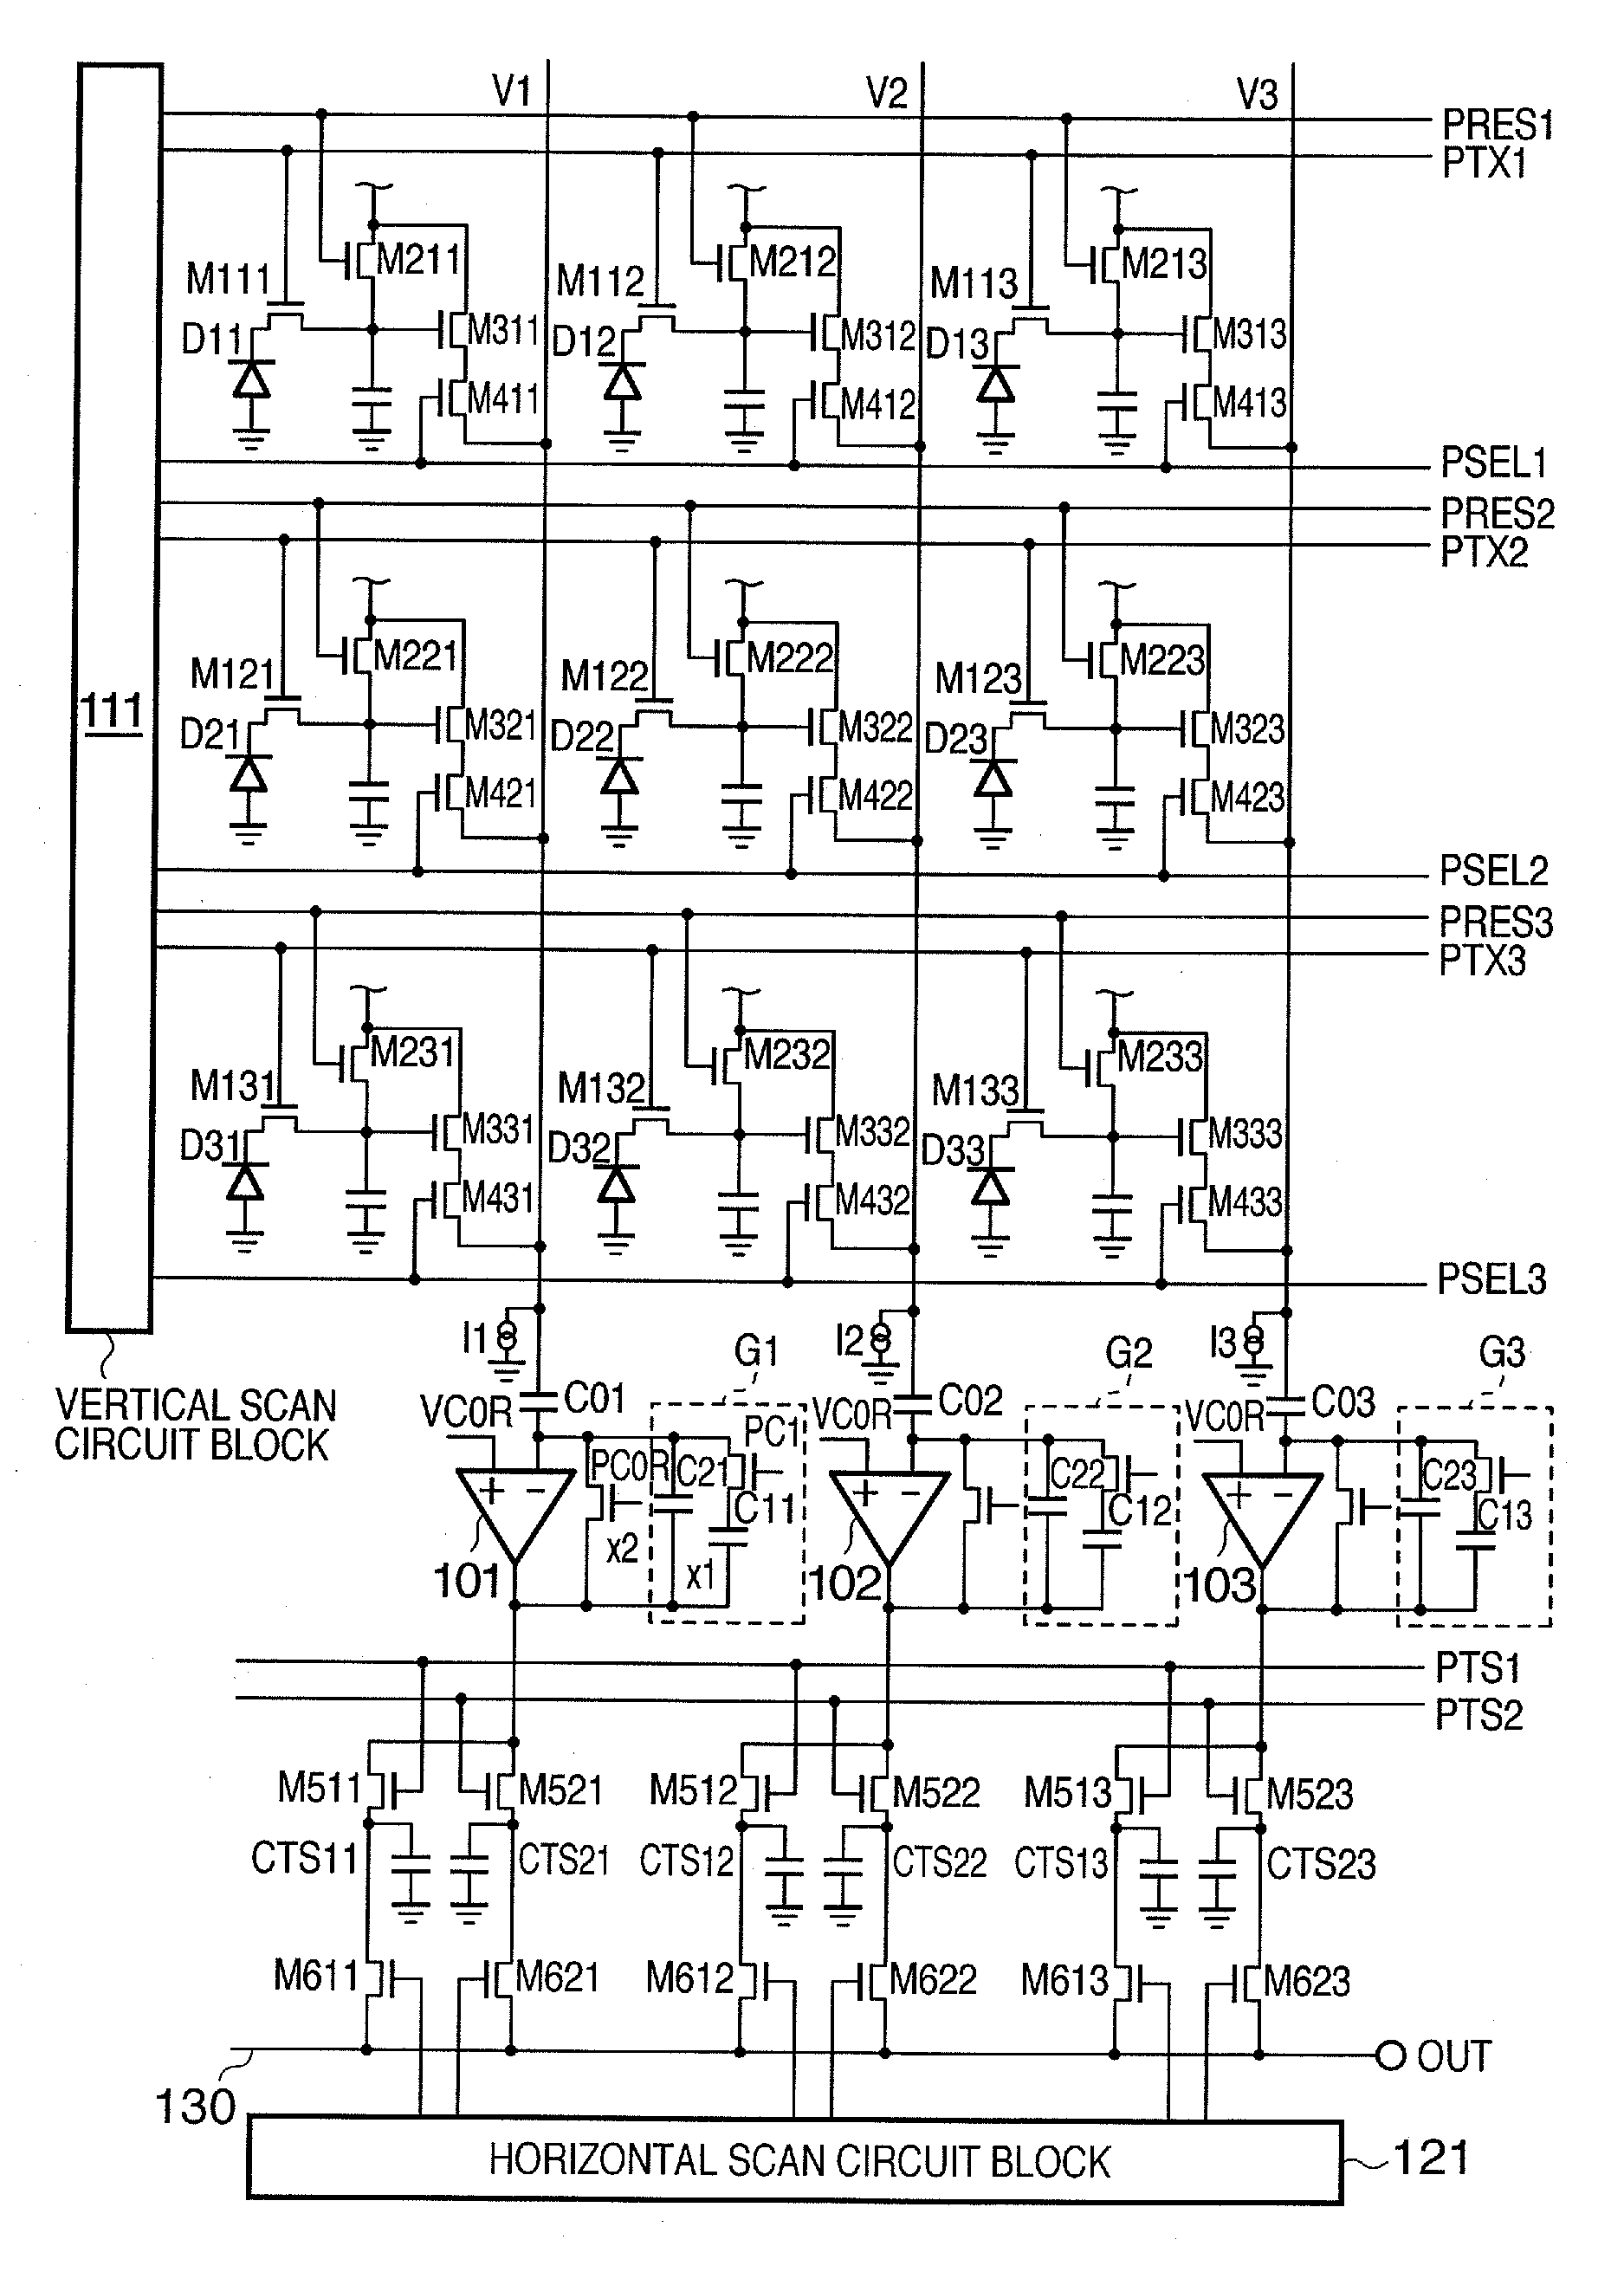 Image capturing apparatus and image capturing system